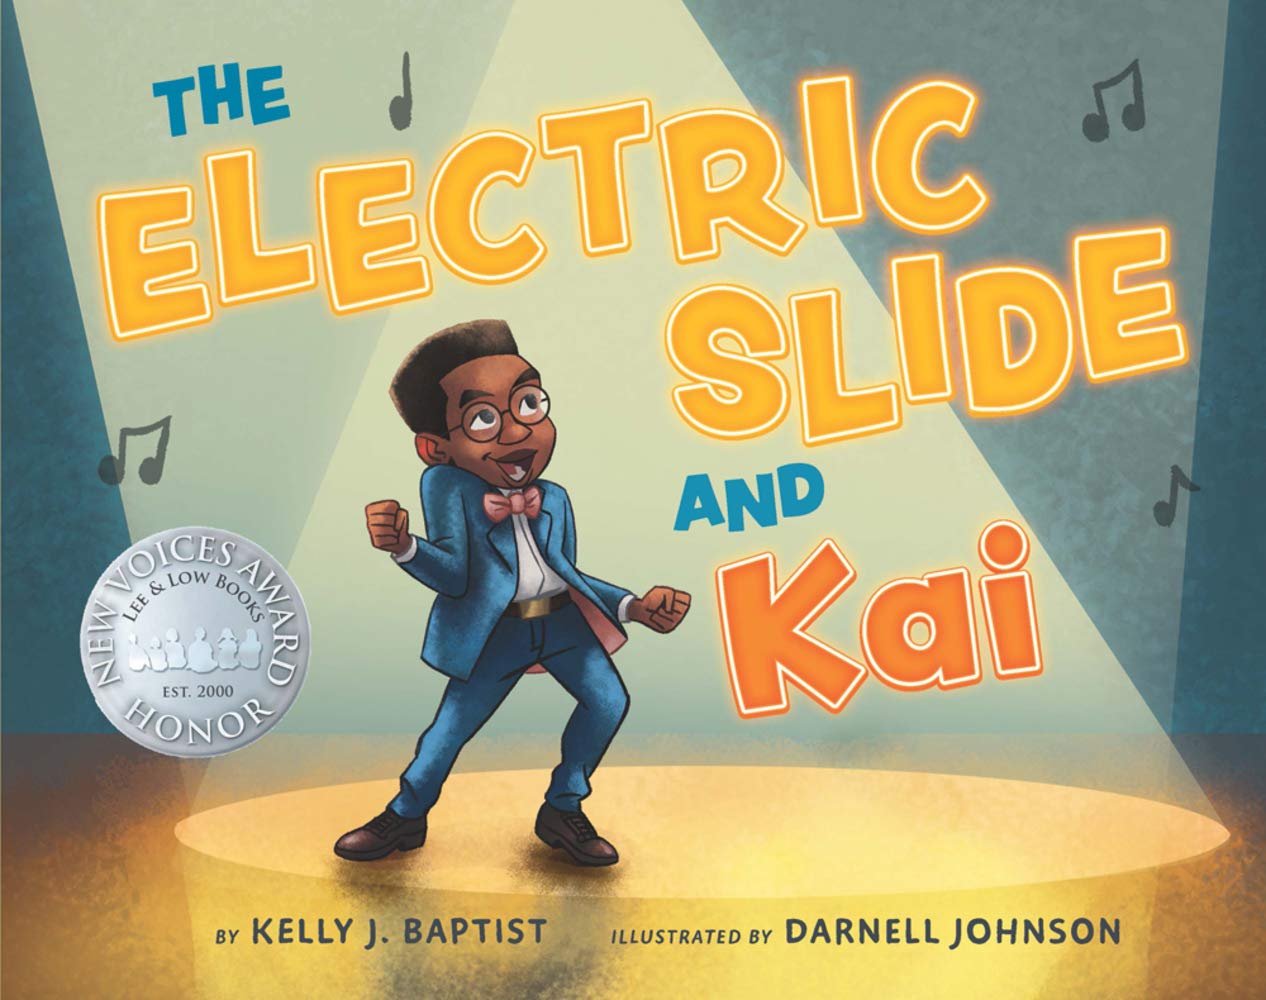 The cover of the book "The Electric Slide and Kai" features a Black boy in a blue suit joyfully dancing in the spotlight as music notes fill the air.